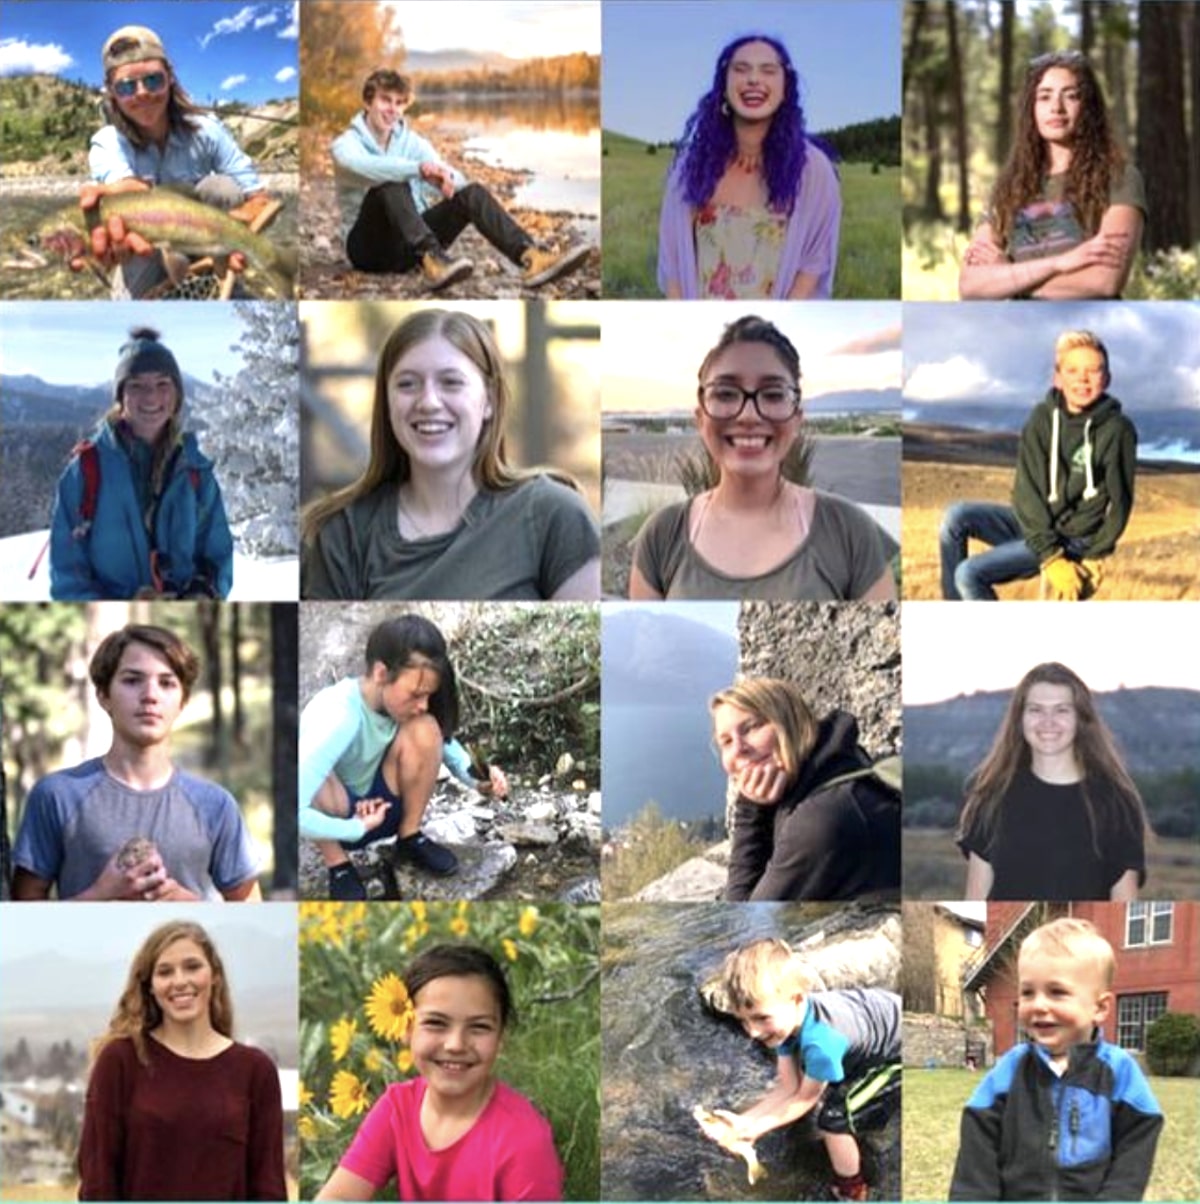 The 16 youth plaintiffs in the first-ever constitutional climate trial in the United States